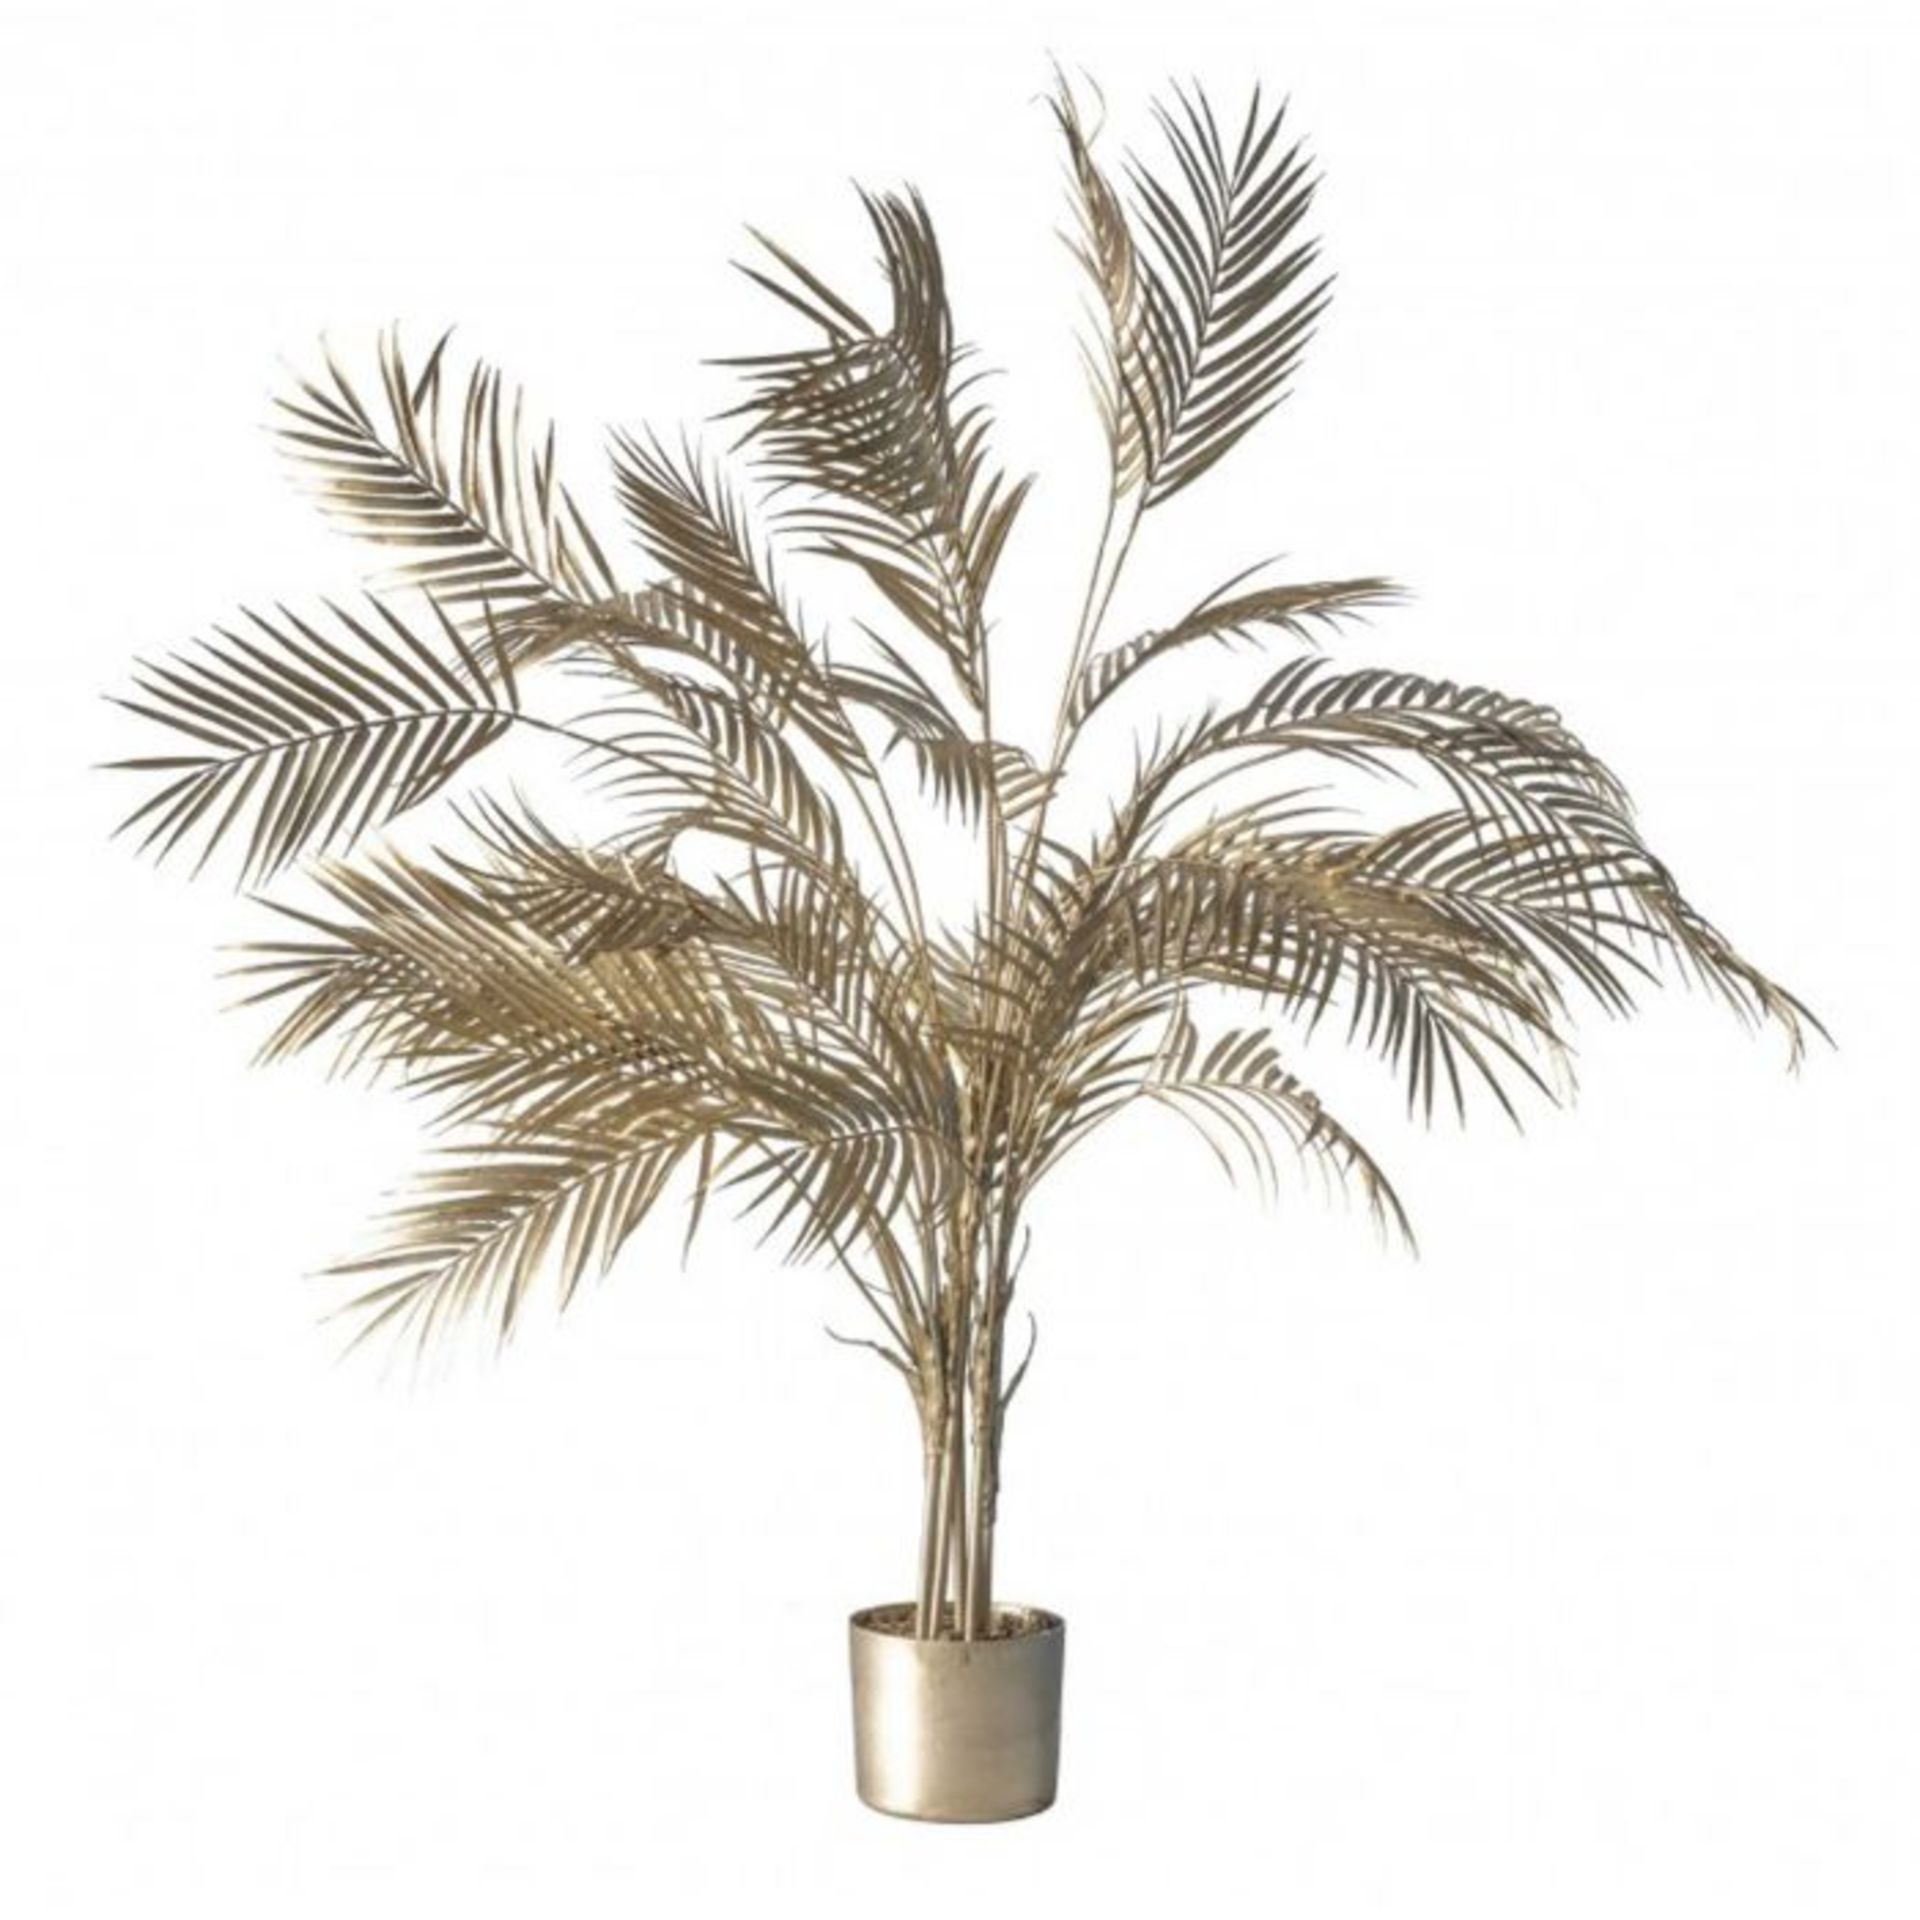 Rowen Homes Brynn Champagne Gold Large Artificial Potted Palm Tree - RRP 94 SKU ROW-APG-7455485-A+